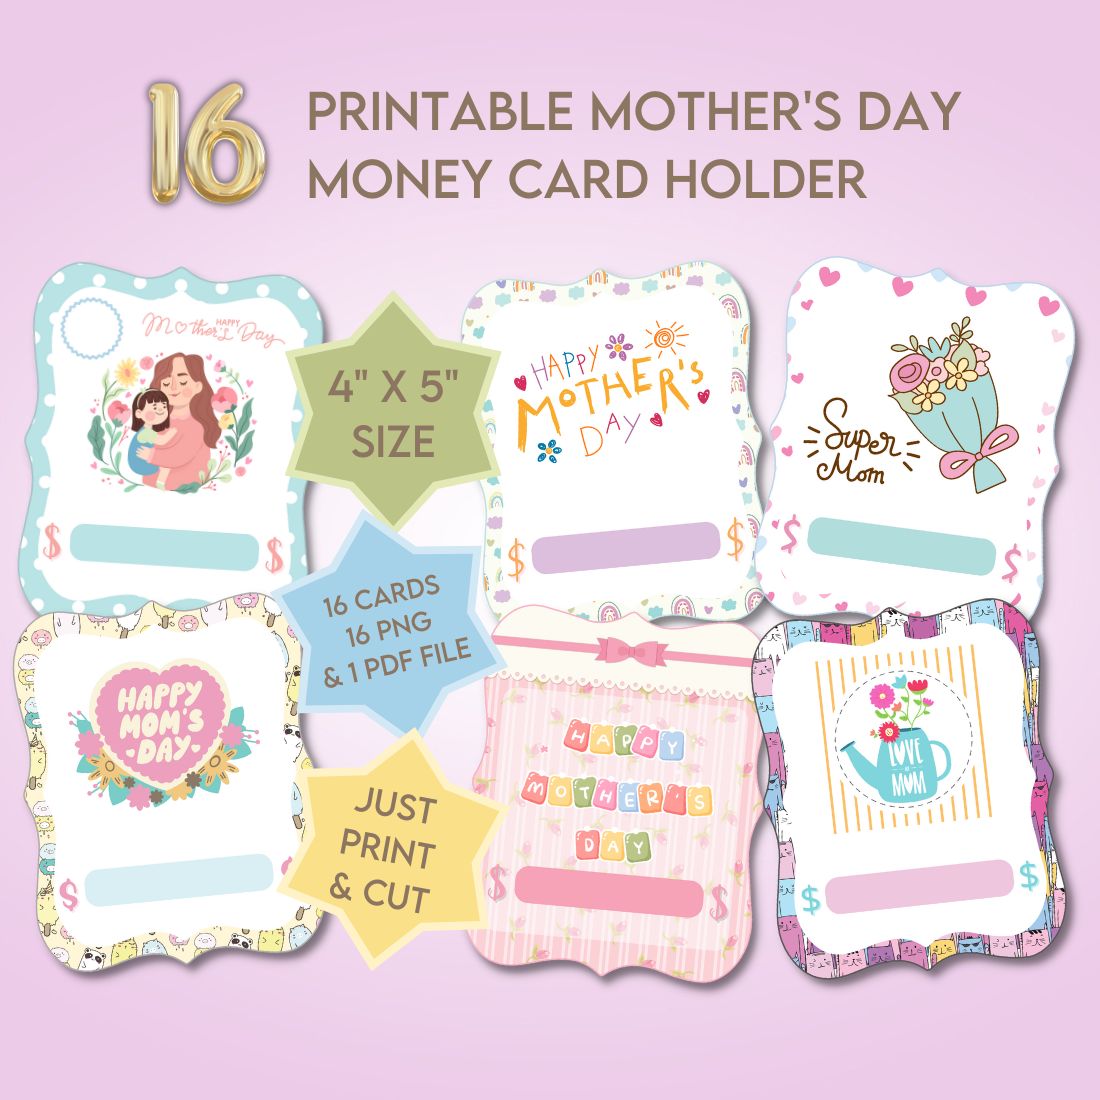 16 Printable Mother's Day Money Card Holder cover image.